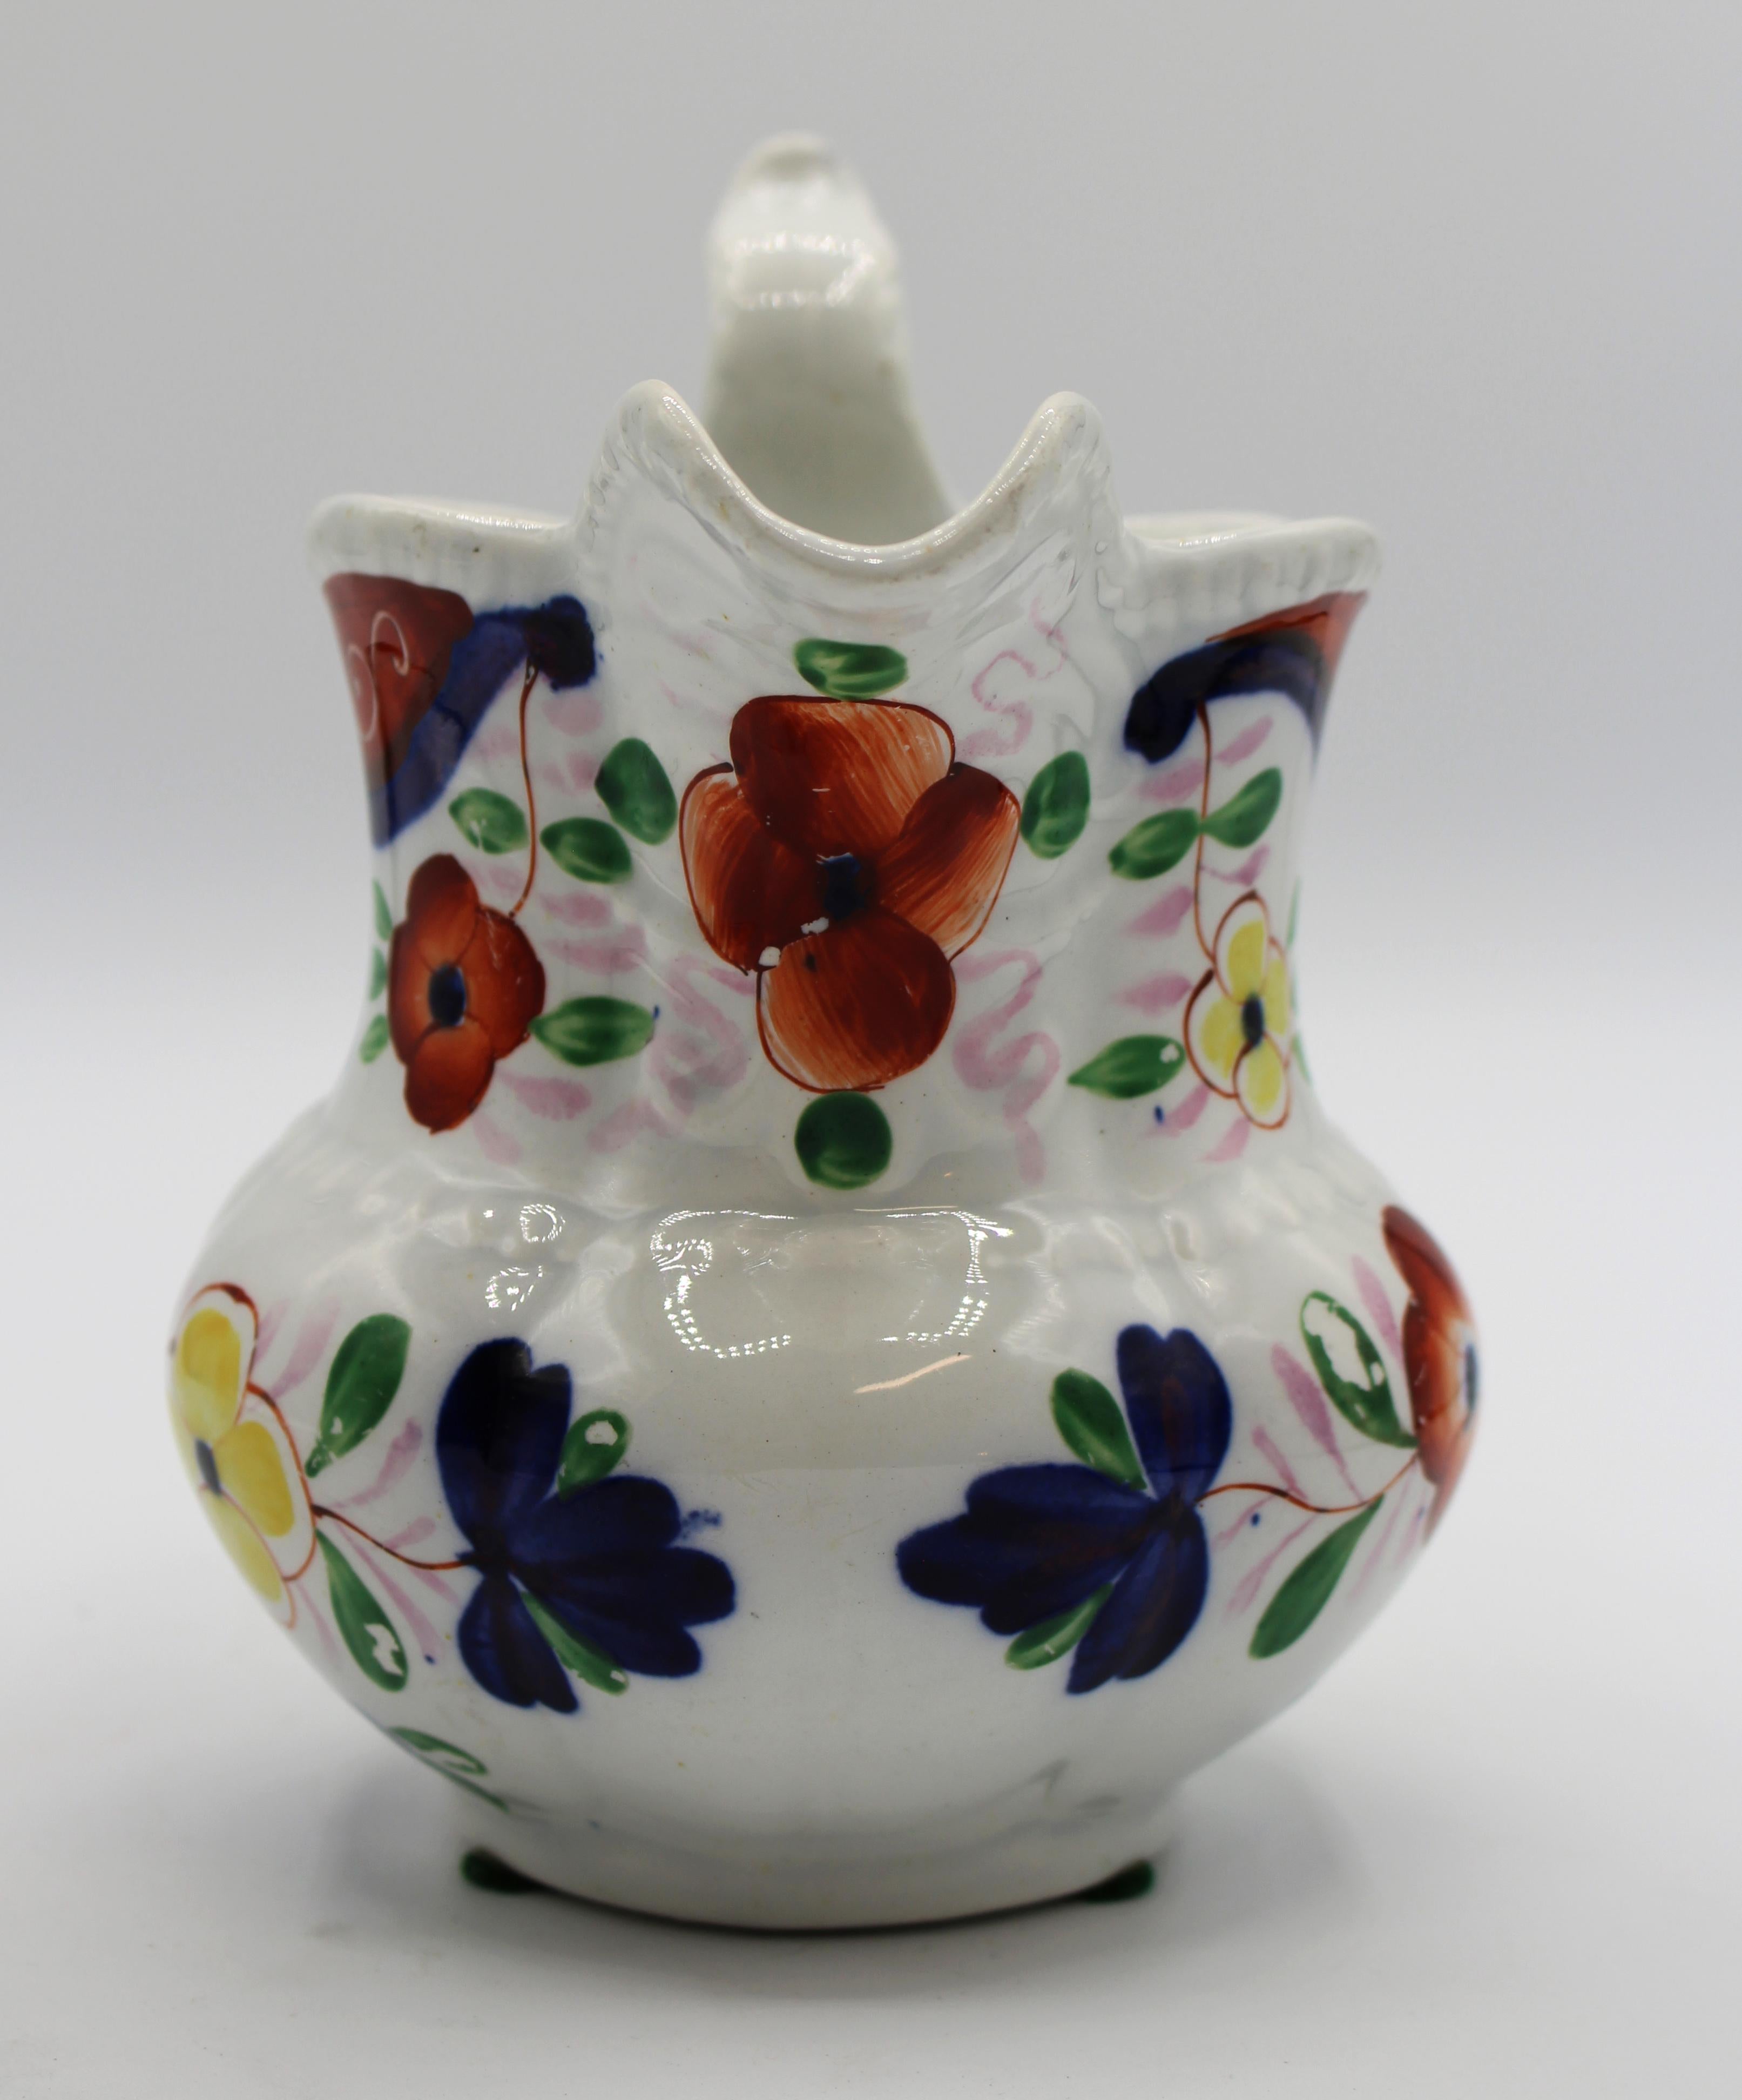 circa 1840 Gaudy Welsh pearlware jug with double-S handle & bold spout. The whole with gadroon borders. Drapery & cornucopia are in cobalt underglaze with flowers of yellow & orange. The handle has tiny rubbed spots caused by hanging on the iron